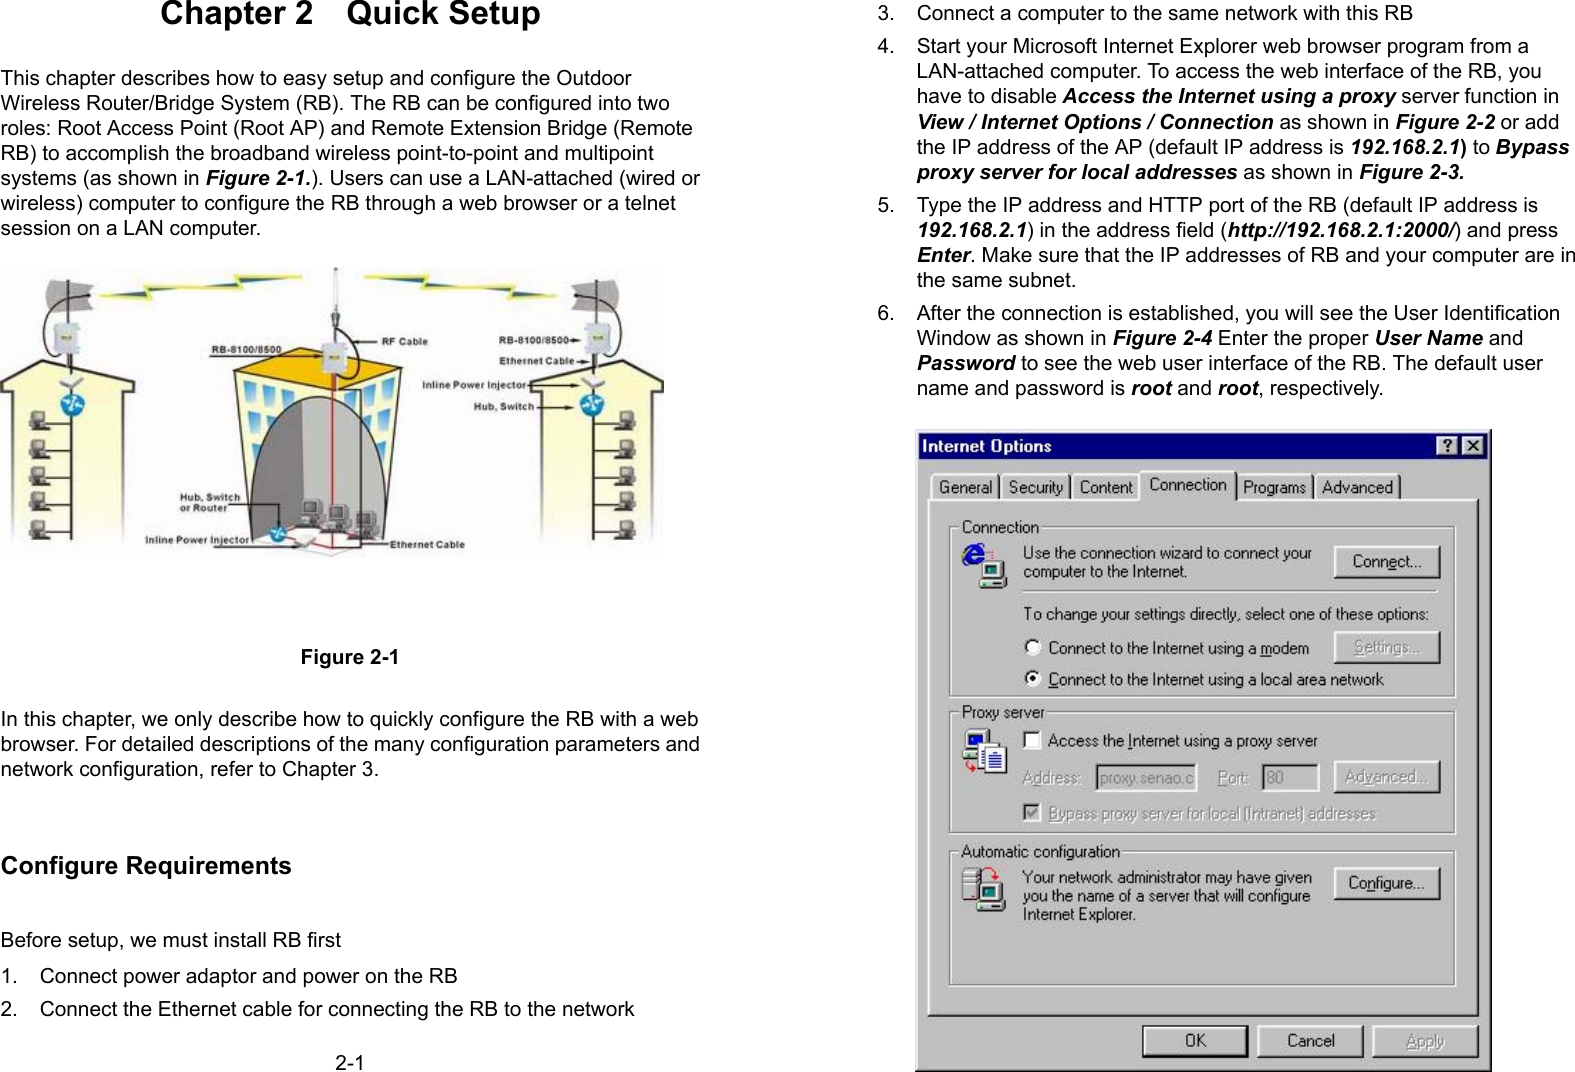 2-1Chapter 2  Quick SetupThis chapter describes how to easy setup and configure the OutdoorWireless Router/Bridge System (RB). The RB can be configured into tworoles: Root Access Point (Root AP) and Remote Extension Bridge (RemoteRB) to accomplish the broadband wireless point-to-point and multipointsystems (as shown in Figure 2-1.). Users can use a LAN-attached (wired orwireless) computer to configure the RB through a web browser or a telnetsession on a LAN computer.Figure 2-1In this chapter, we only describe how to quickly configure the RB with a webbrowser. For detailed descriptions of the many configuration parameters andnetwork configuration, refer to Chapter 3.Configure RequirementsBefore setup, we must install RB first1.  Connect power adaptor and power on the RB2.  Connect the Ethernet cable for connecting the RB to the network2-23.  Connect a computer to the same network with this RB4.  Start your Microsoft Internet Explorer web browser program from aLAN-attached computer. To access the web interface of the RB, youhave to disable Access the Internet using a proxy server function inView / Internet Options / Connection as shown in Figure 2-2 or addthe IP address of the AP (default IP address is 192.168.2.1) to Bypassproxy server for local addresses as shown in Figure 2-3.5.  Type the IP address and HTTP port of the RB (default IP address is192.168.2.1) in the address field (http://192.168.2.1:2000/) and pressEnter. Make sure that the IP addresses of RB and your computer are inthe same subnet.6.  After the connection is established, you will see the User IdentificationWindow as shown in Figure 2-4 Enter the proper User Name andPassword to see the web user interface of the RB. The default username and password is root and root, respectively.